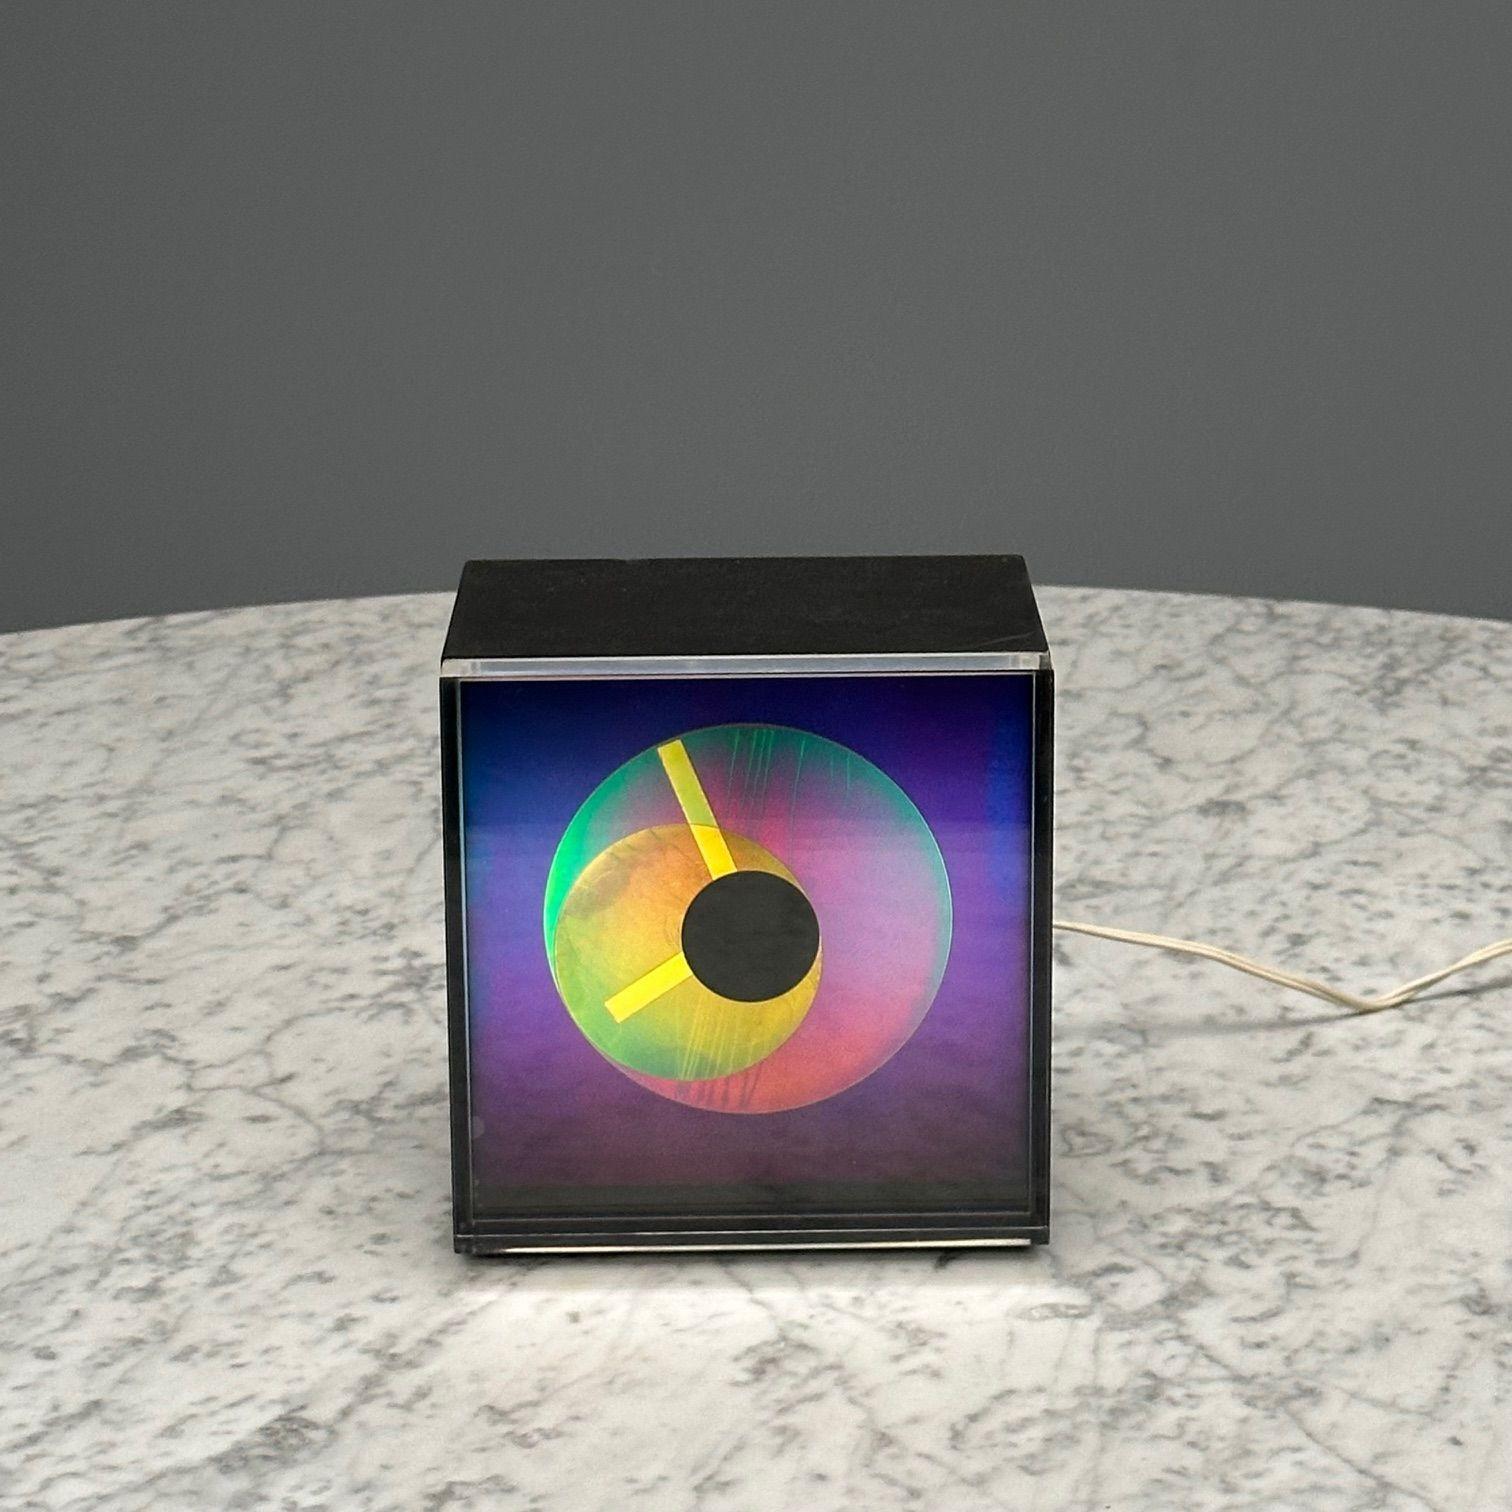 American Mid-Century Modern Prisma aluminum aurora clock, Kirsch Hamilton, 1970s.

A vintage 1970s Aurora clock. These stunning clocks are in the collection of the Museum of Modern Art MOMA in NY. Developed in the 1970s by a NASA engineer and an